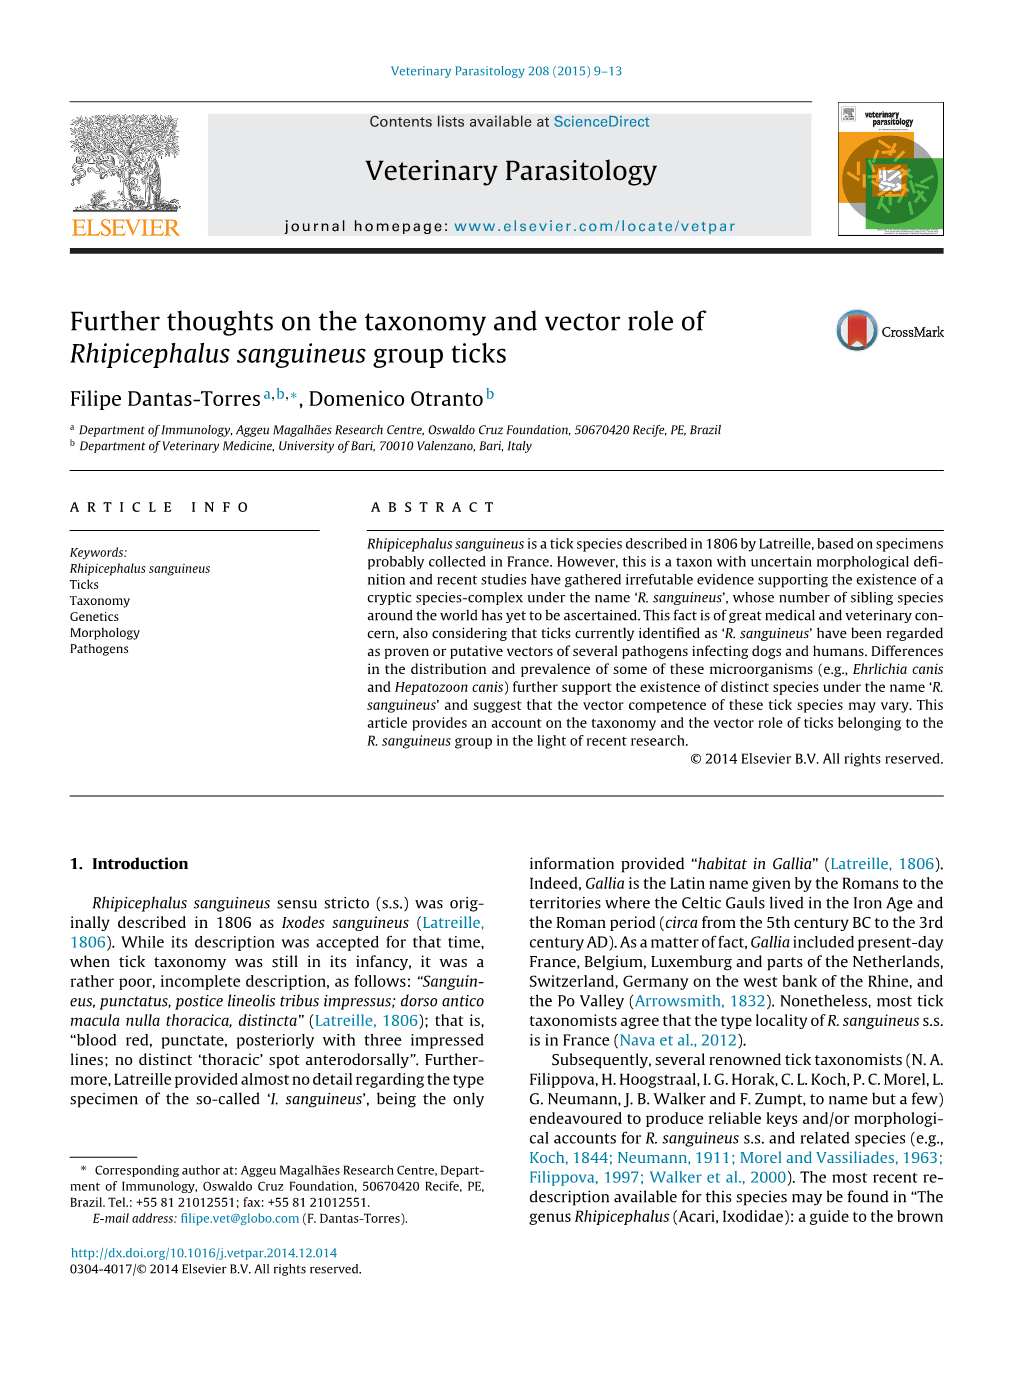 Further Thoughts on the Taxonomy and Vector Role of Rhipicephalus Sanguineus Group Ticks